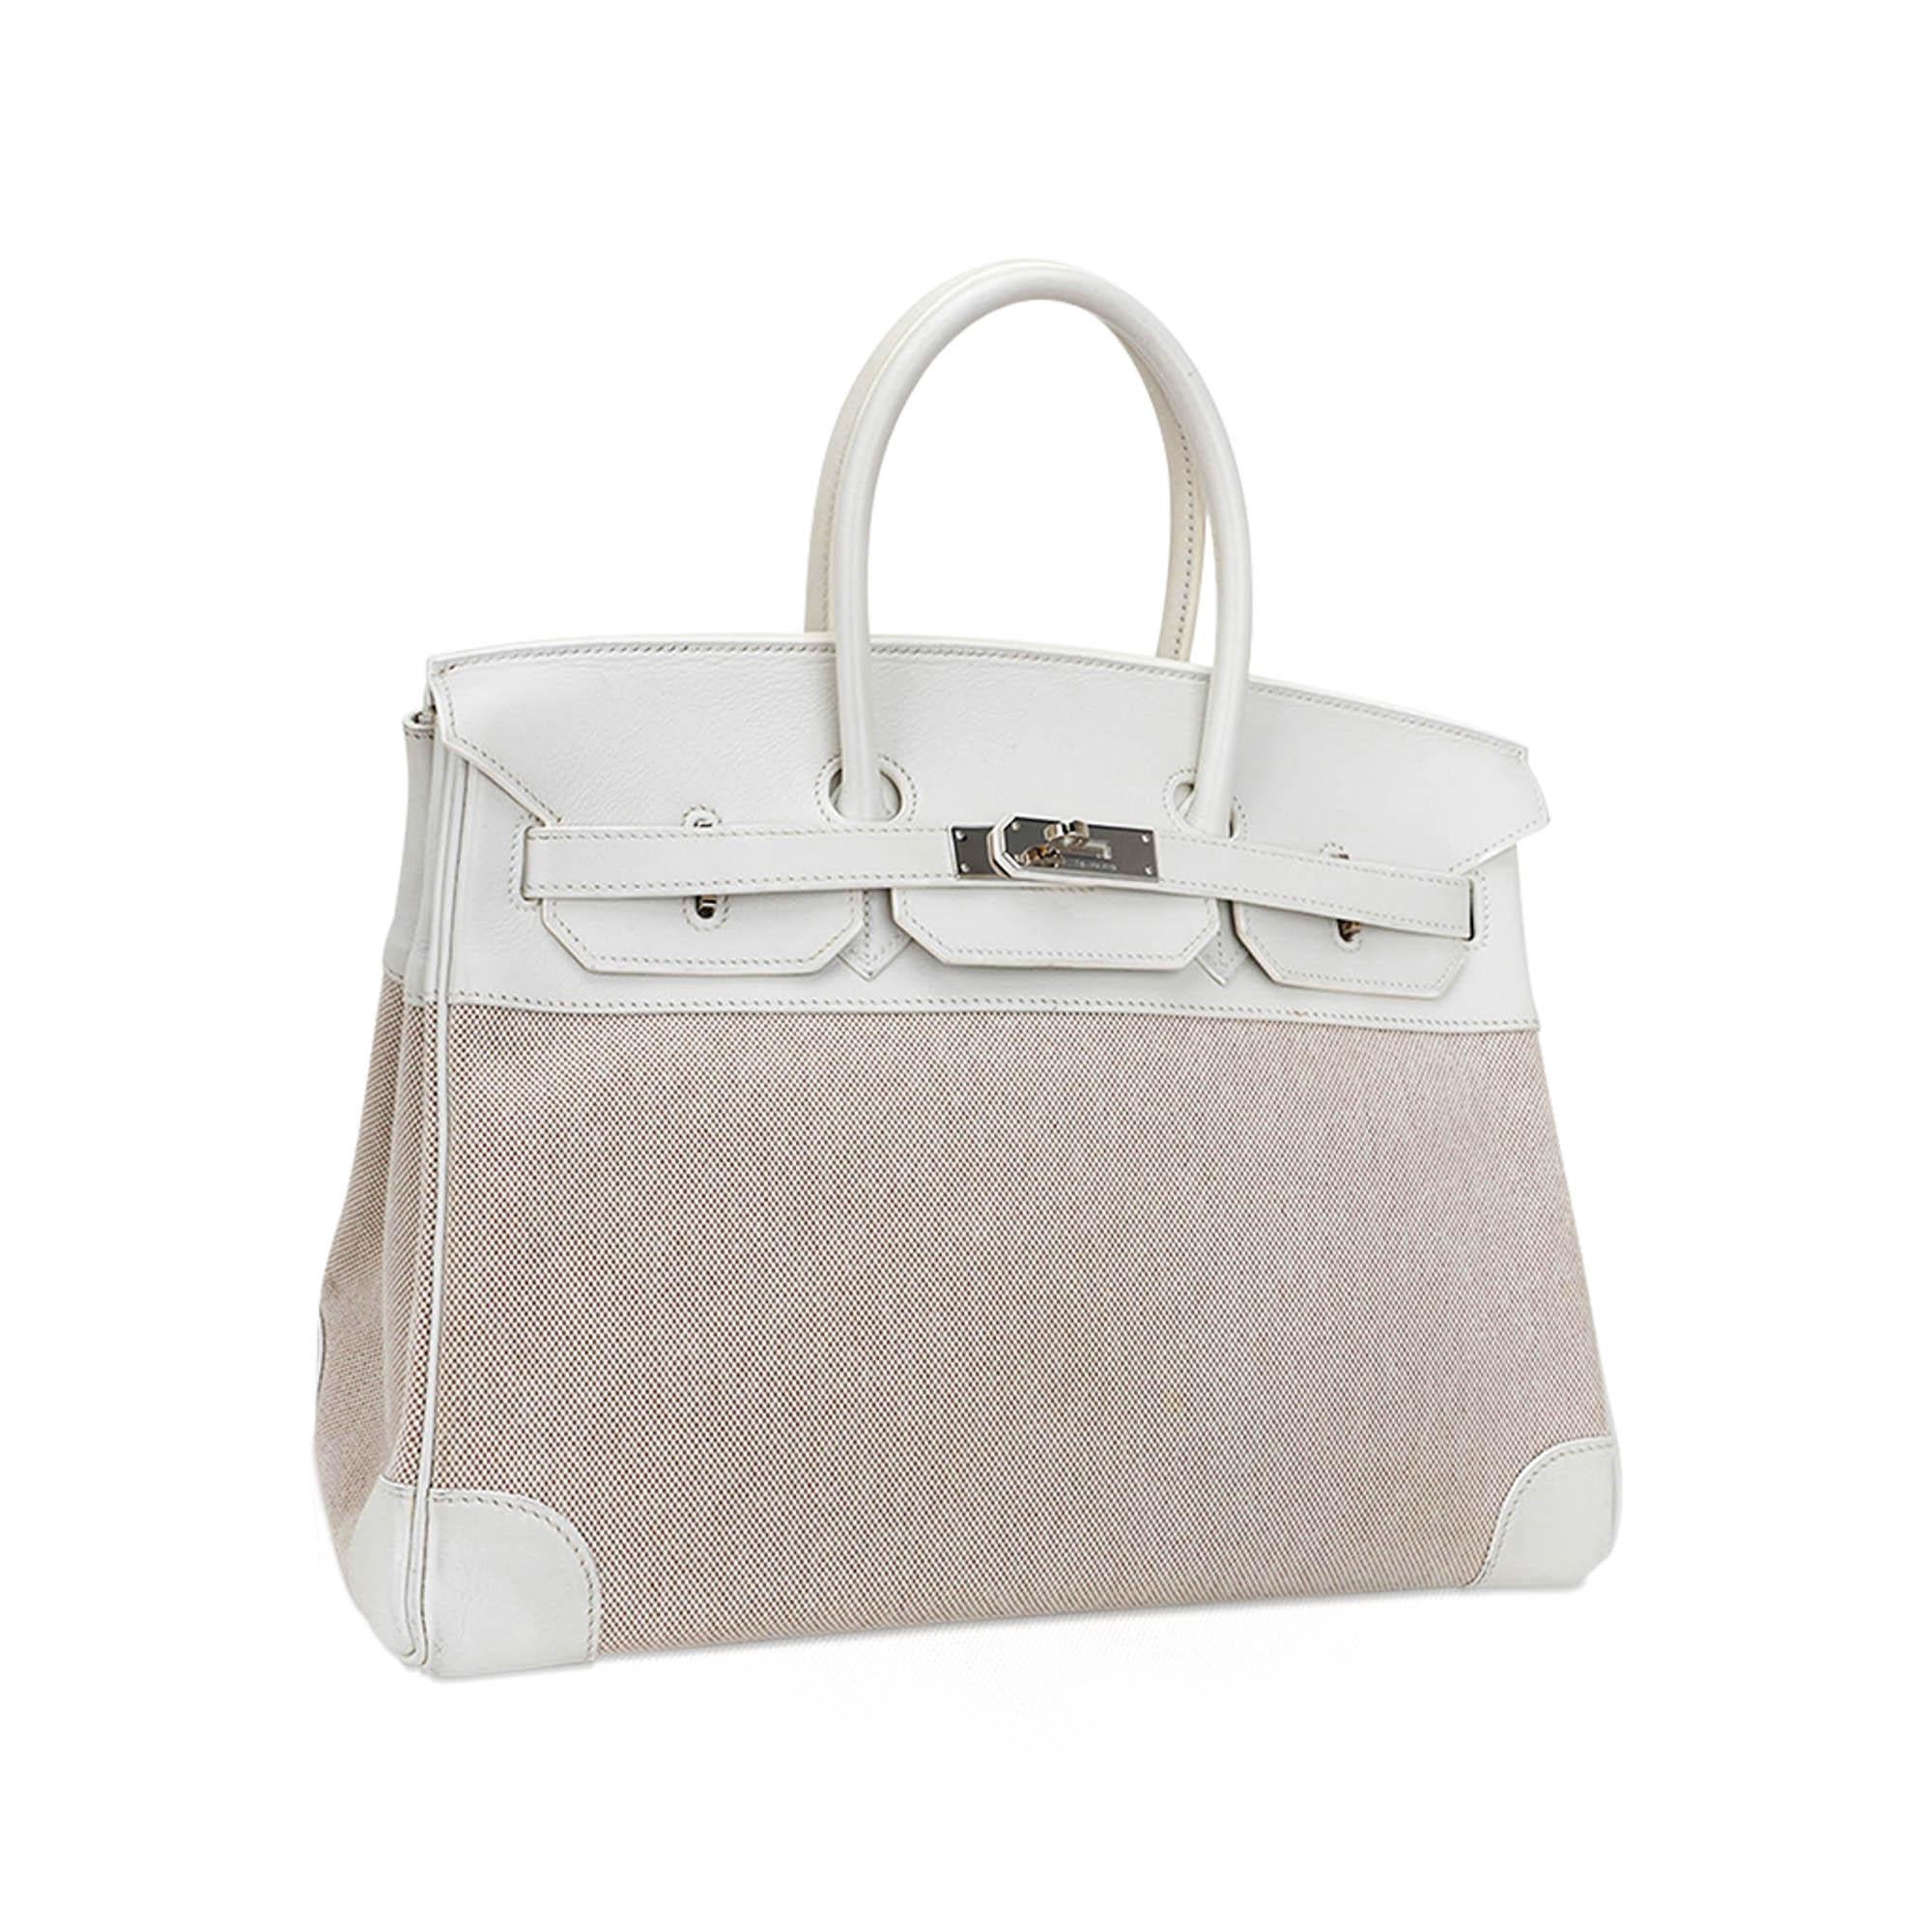 Hermes Birkin 35 bag featured in rare White Swift leather with coveted Toile. 
This very rare bag is a collectors treasure!
A chic combination with Palladium hardware.
Comes with lock, keys, clochette, sleeper and signature Hermes box.
Hardware is